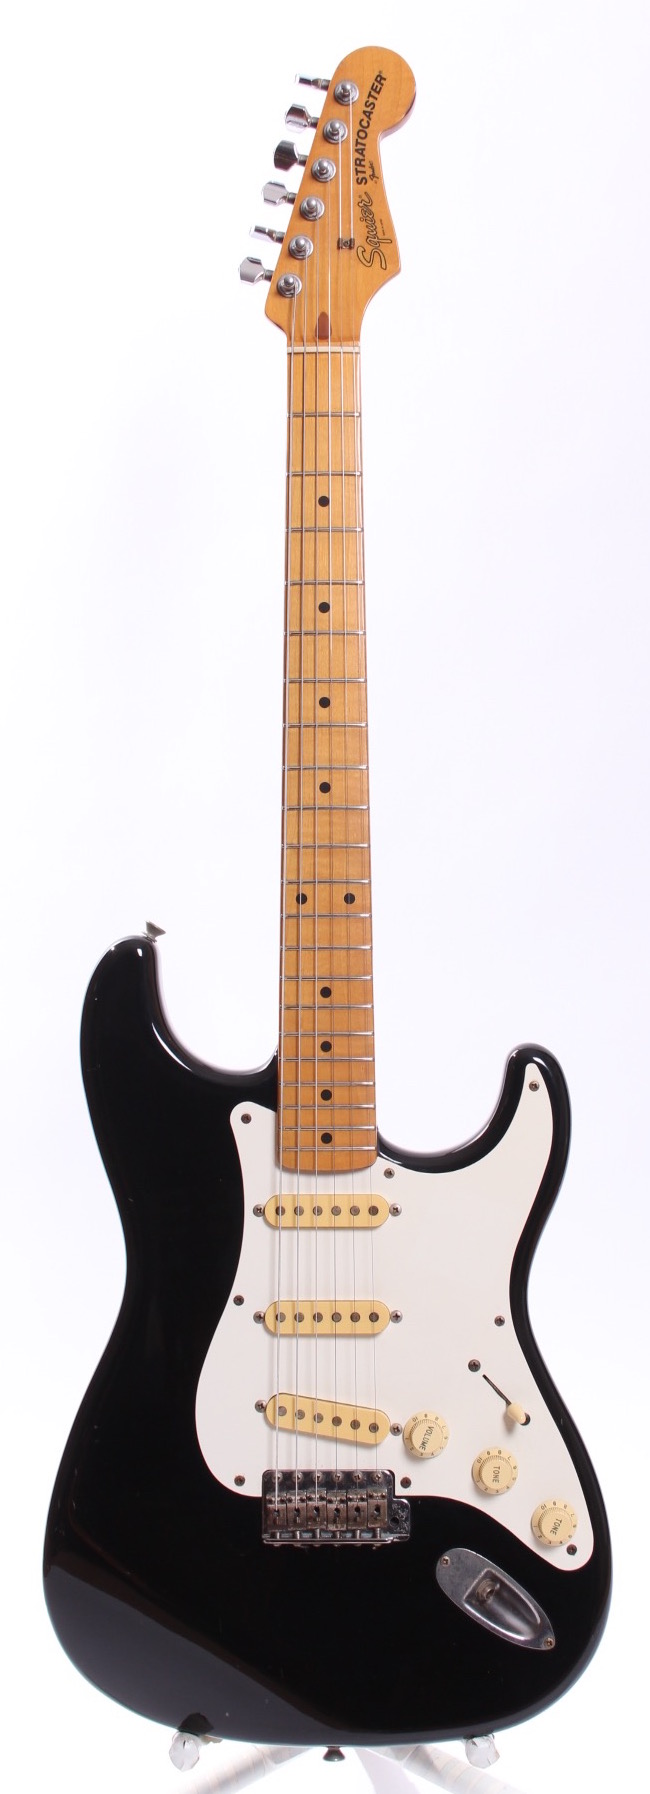 how to read fender squier stratocaster serial numbers